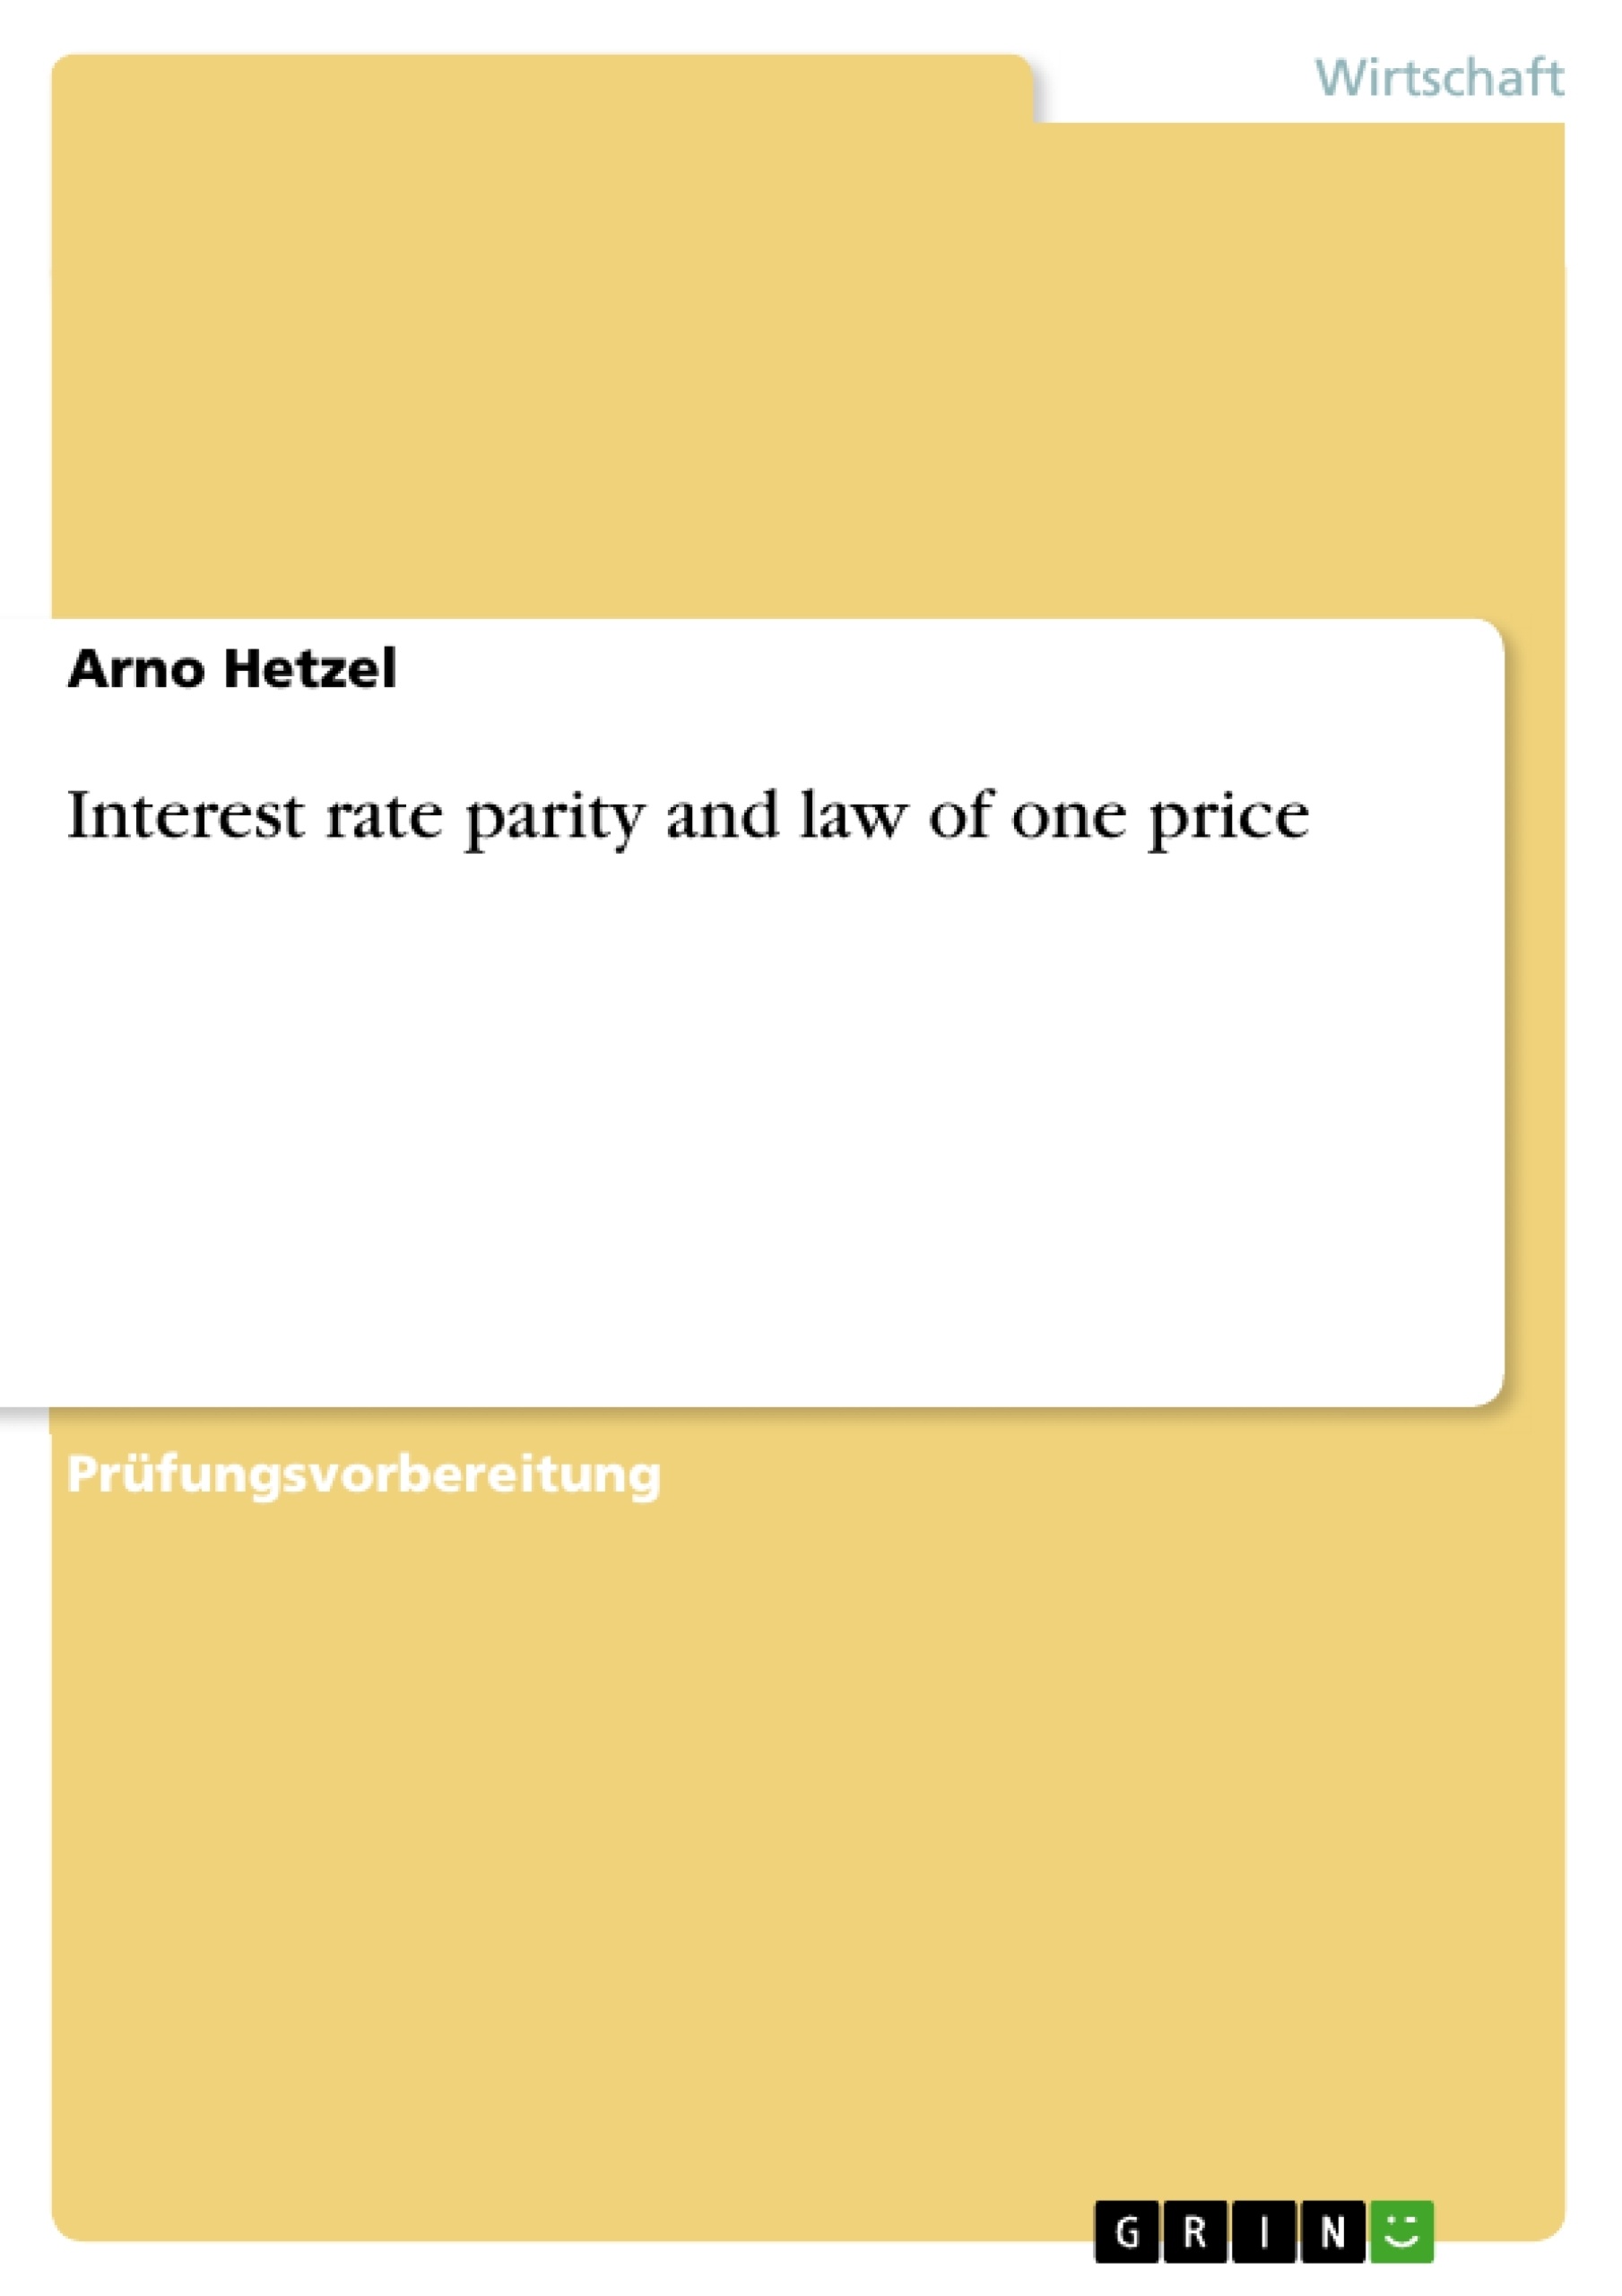 Titre: Interest rate parity and law of one price